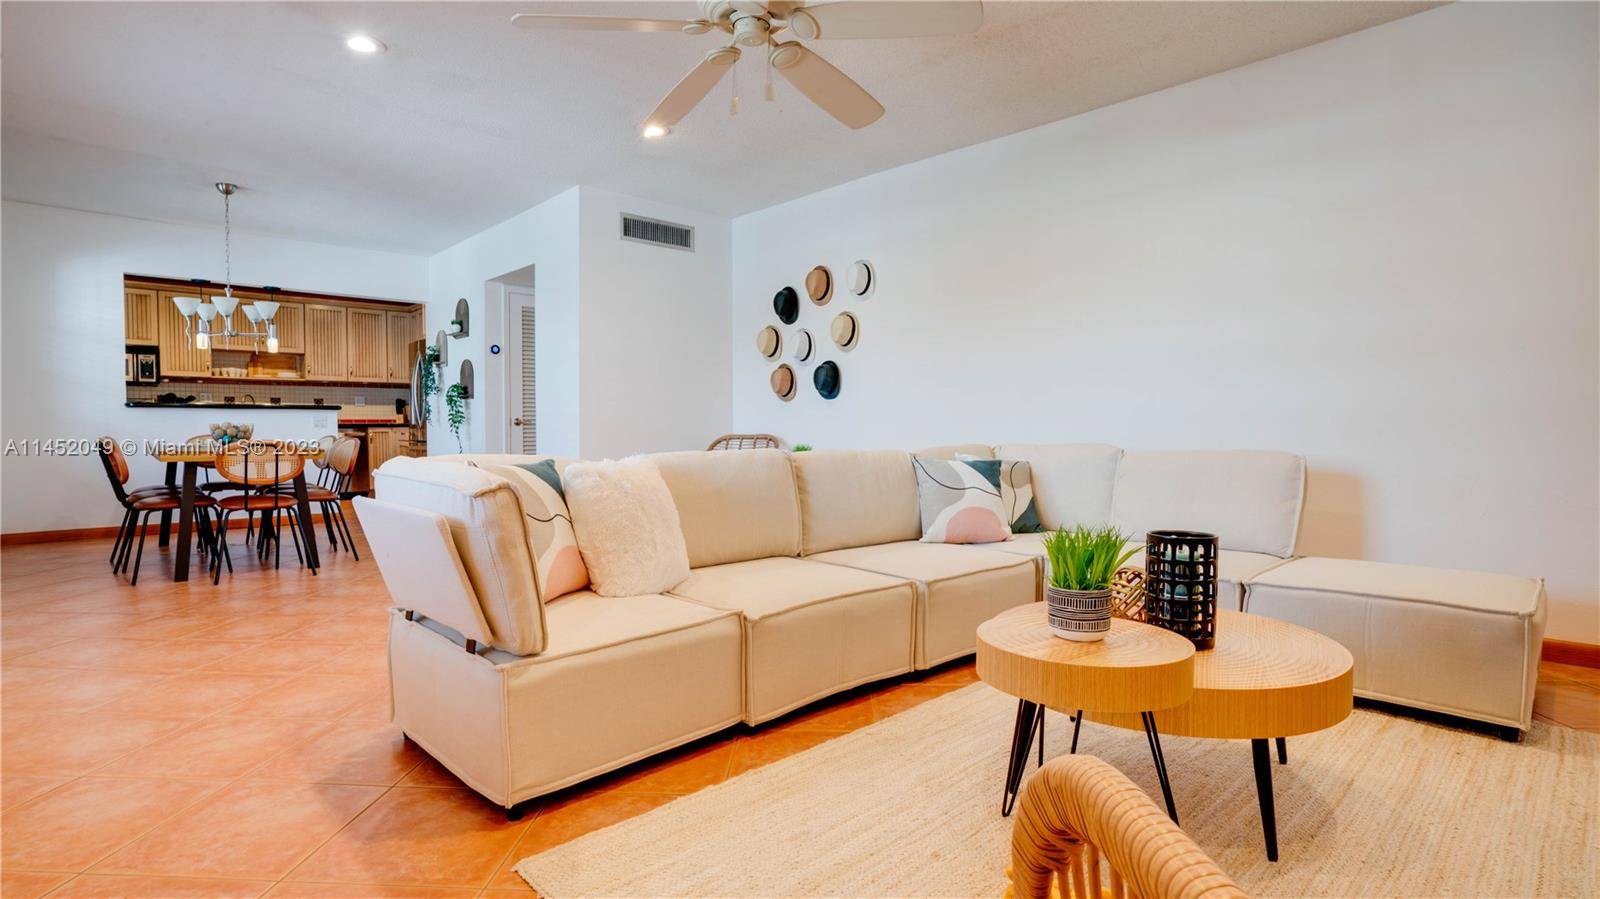 LOOKING FOR SHORT TERM TENANT Found in Fort Lauderdale's Sunrise Intracoastal neighborhood, this two bedroom apartment provides you with an easy and comfortable stay !